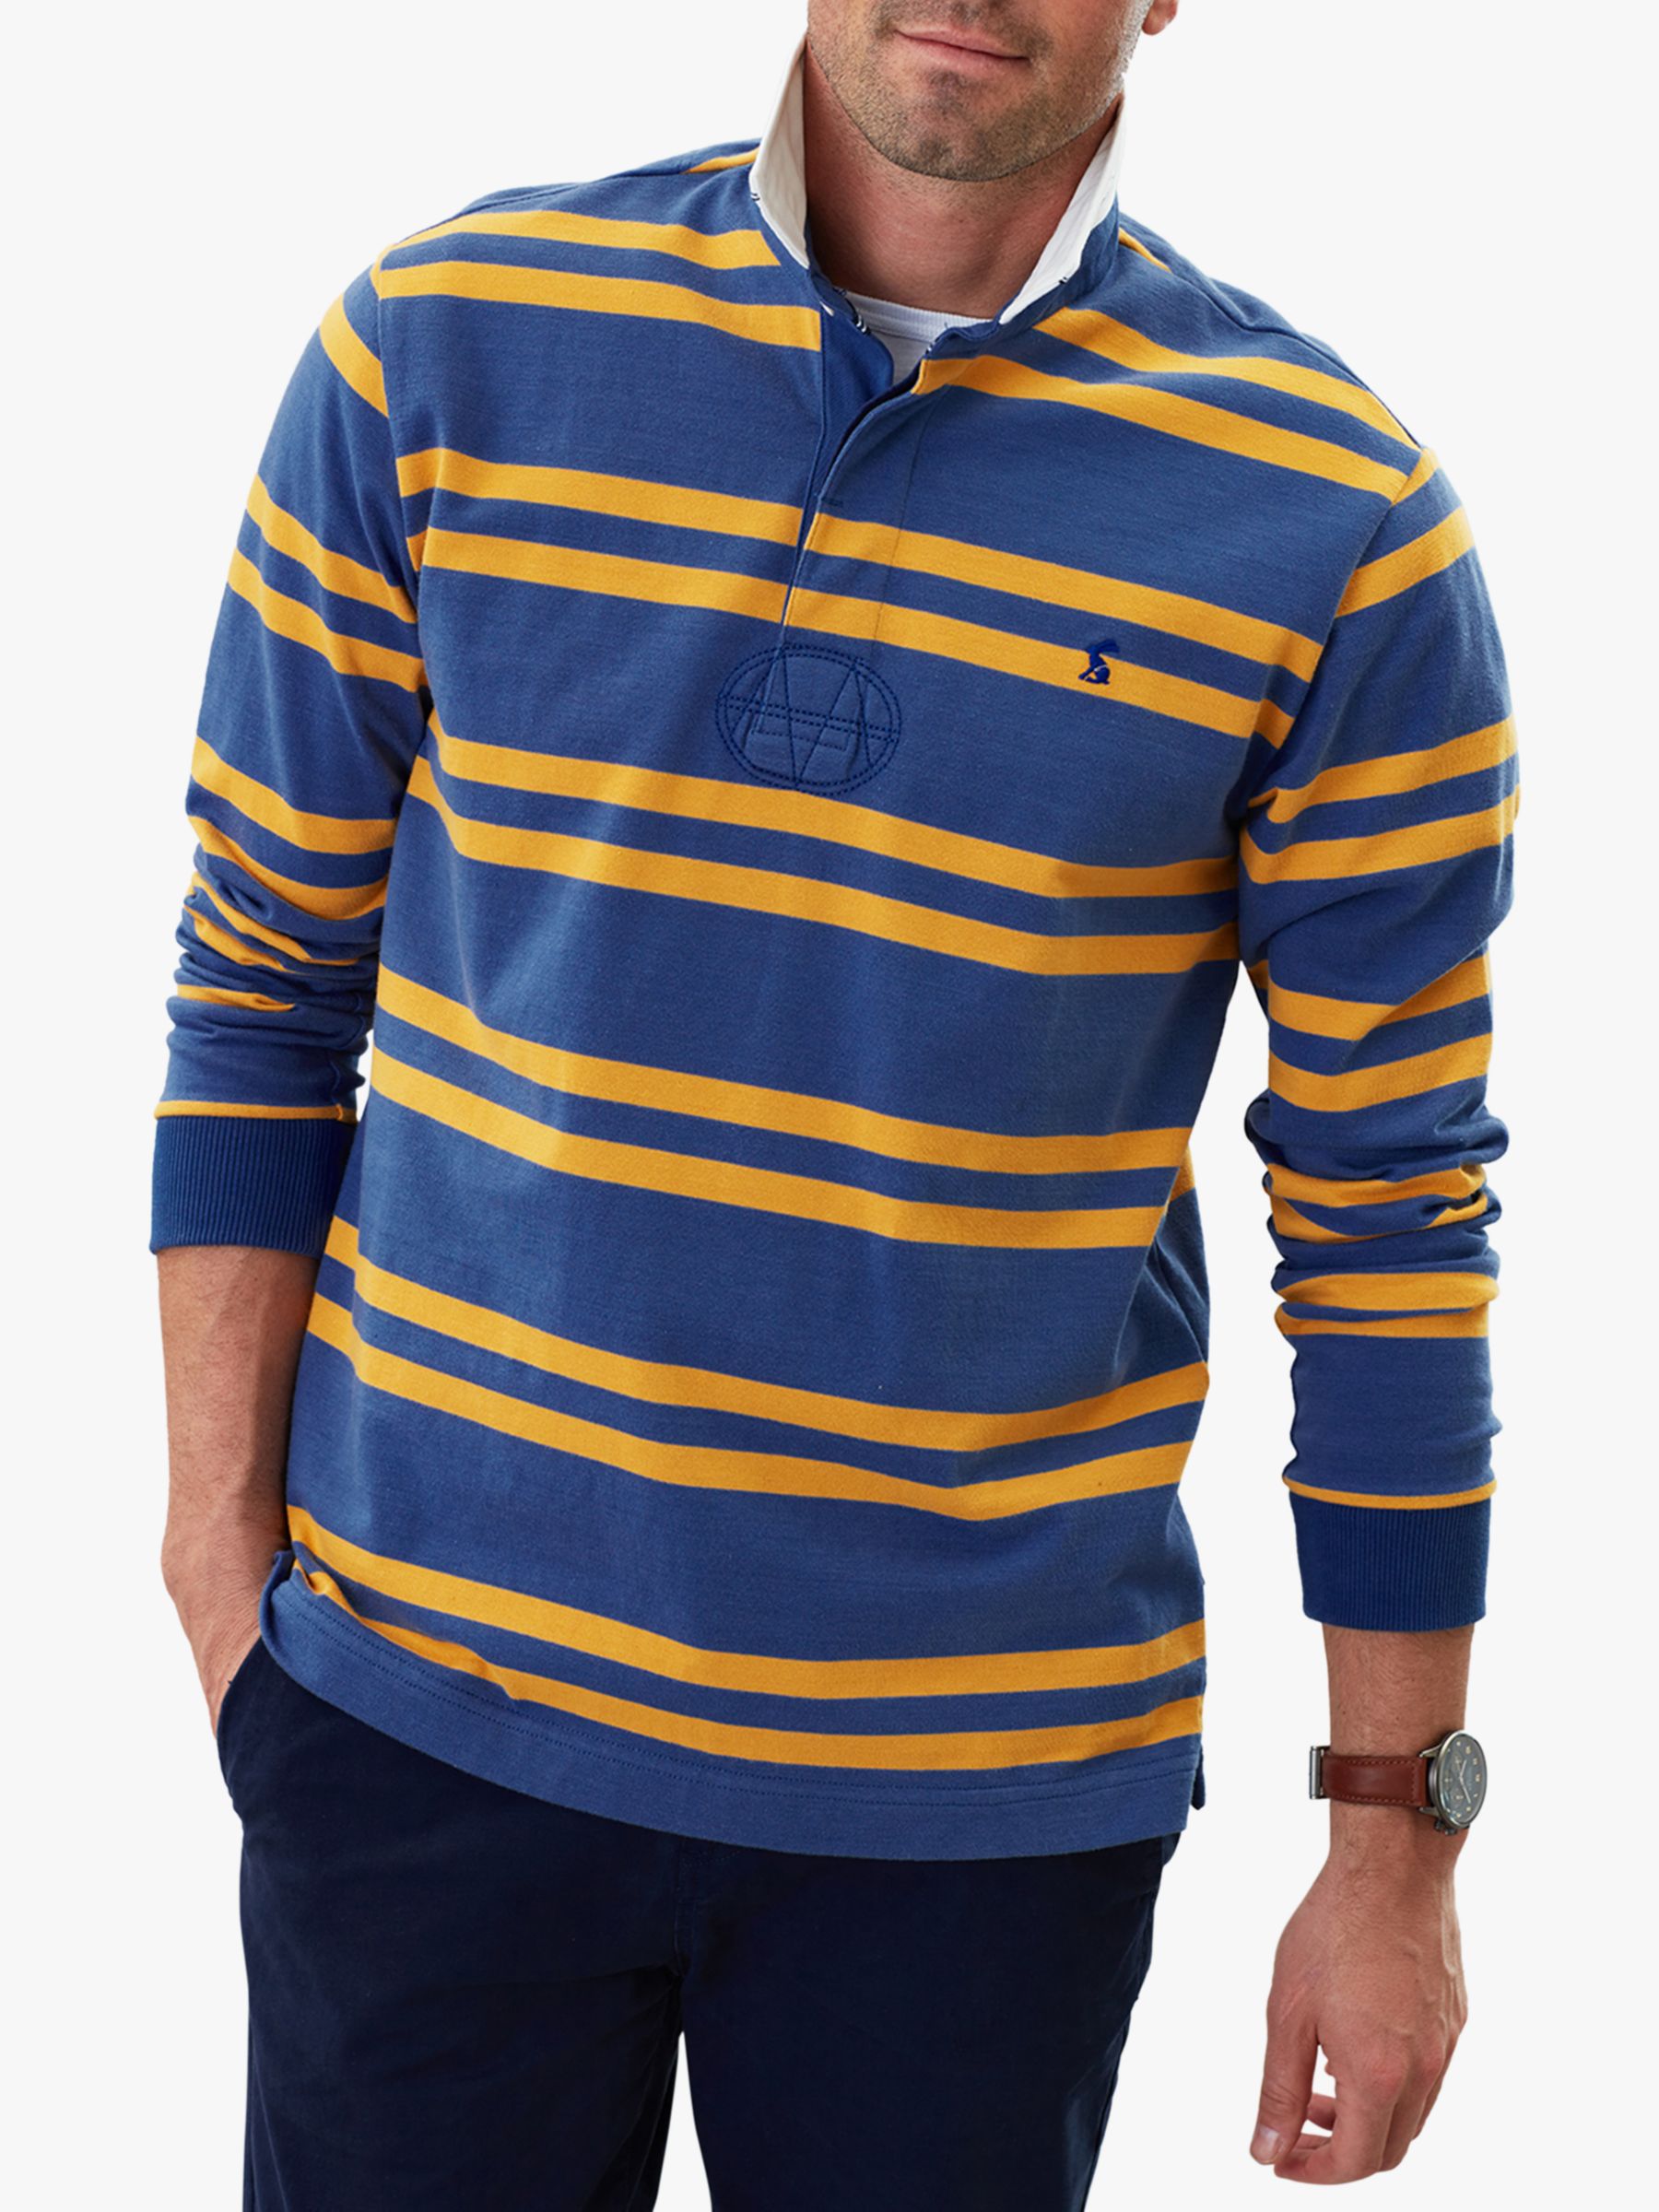 Joules Onside Long Sleeve Stripe Rugby Polo Shirt, Blue/Yellow at John ...